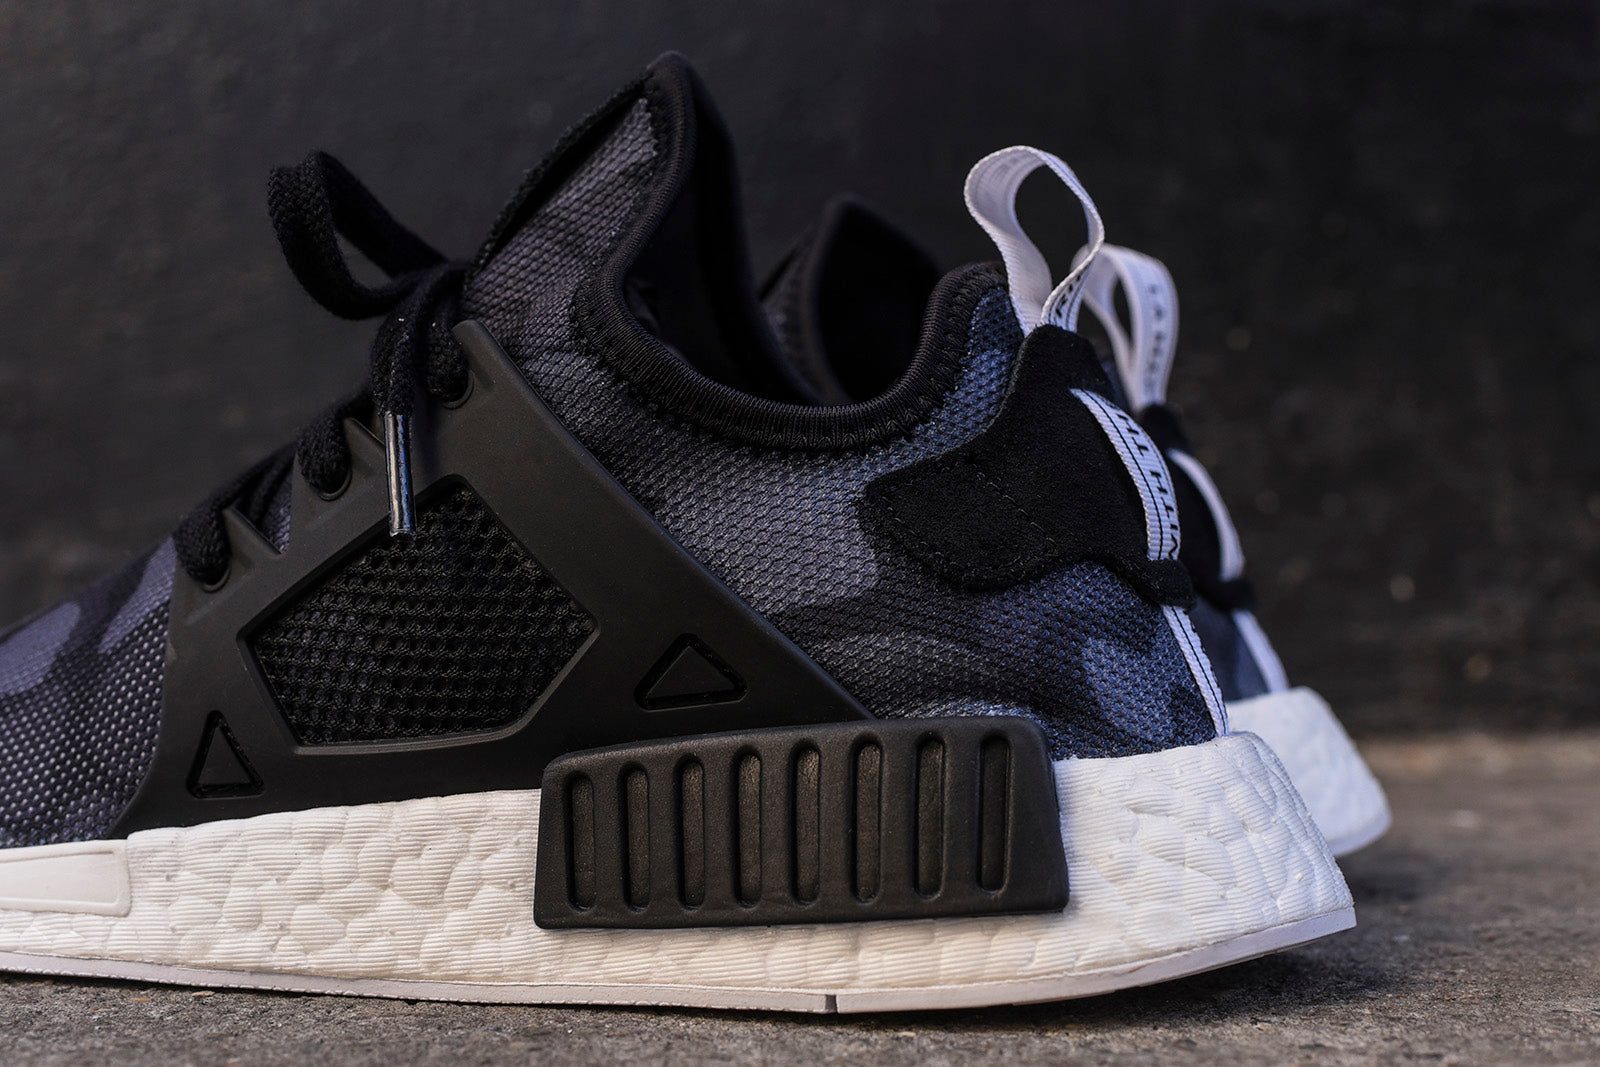 adidas Originals NMD_ XR1 Duck Camo Pack – Kith